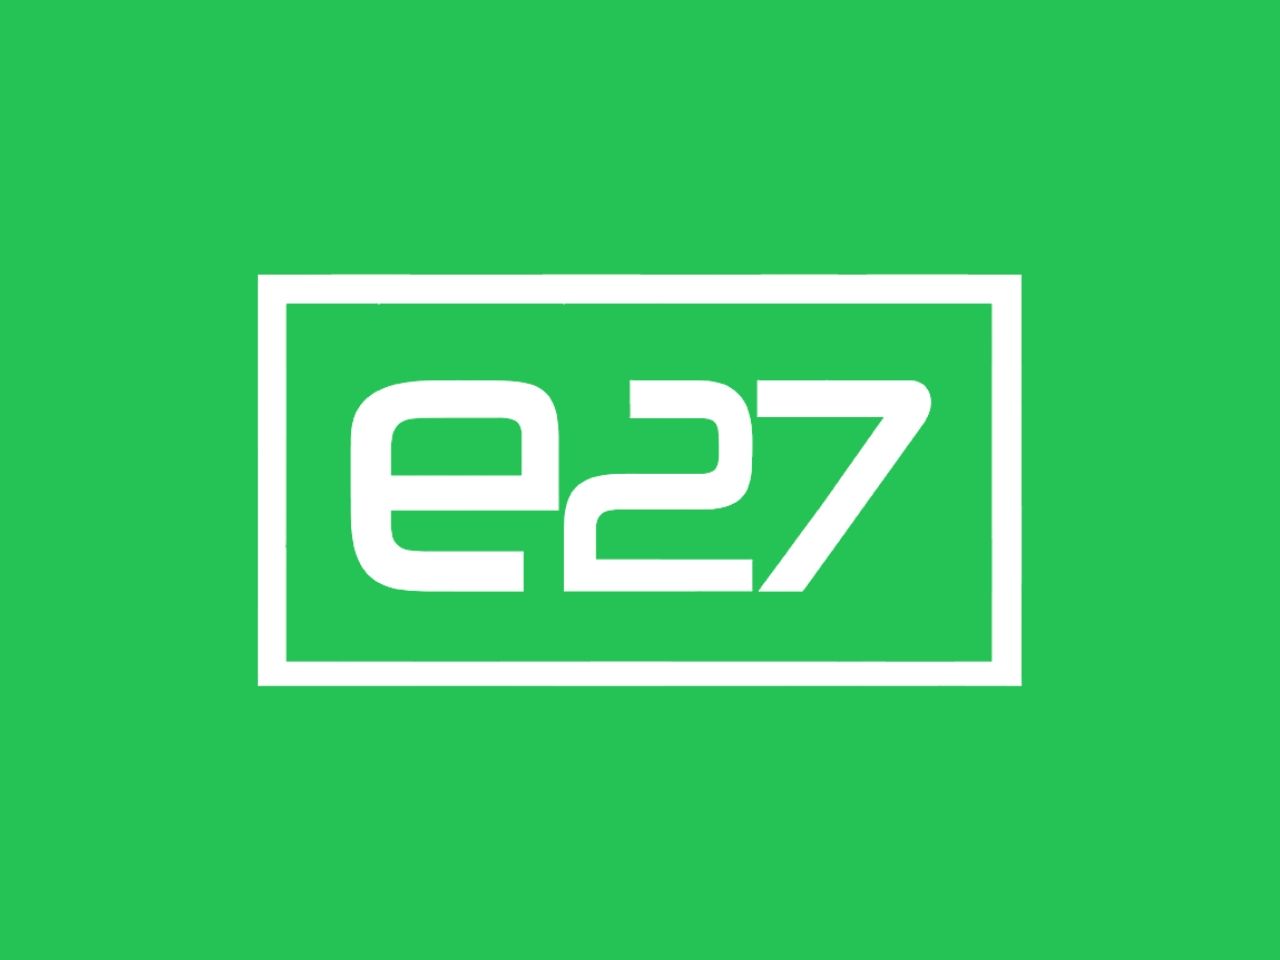 Asian media firm e27 suffers data breach, hackers asking for “small donation”